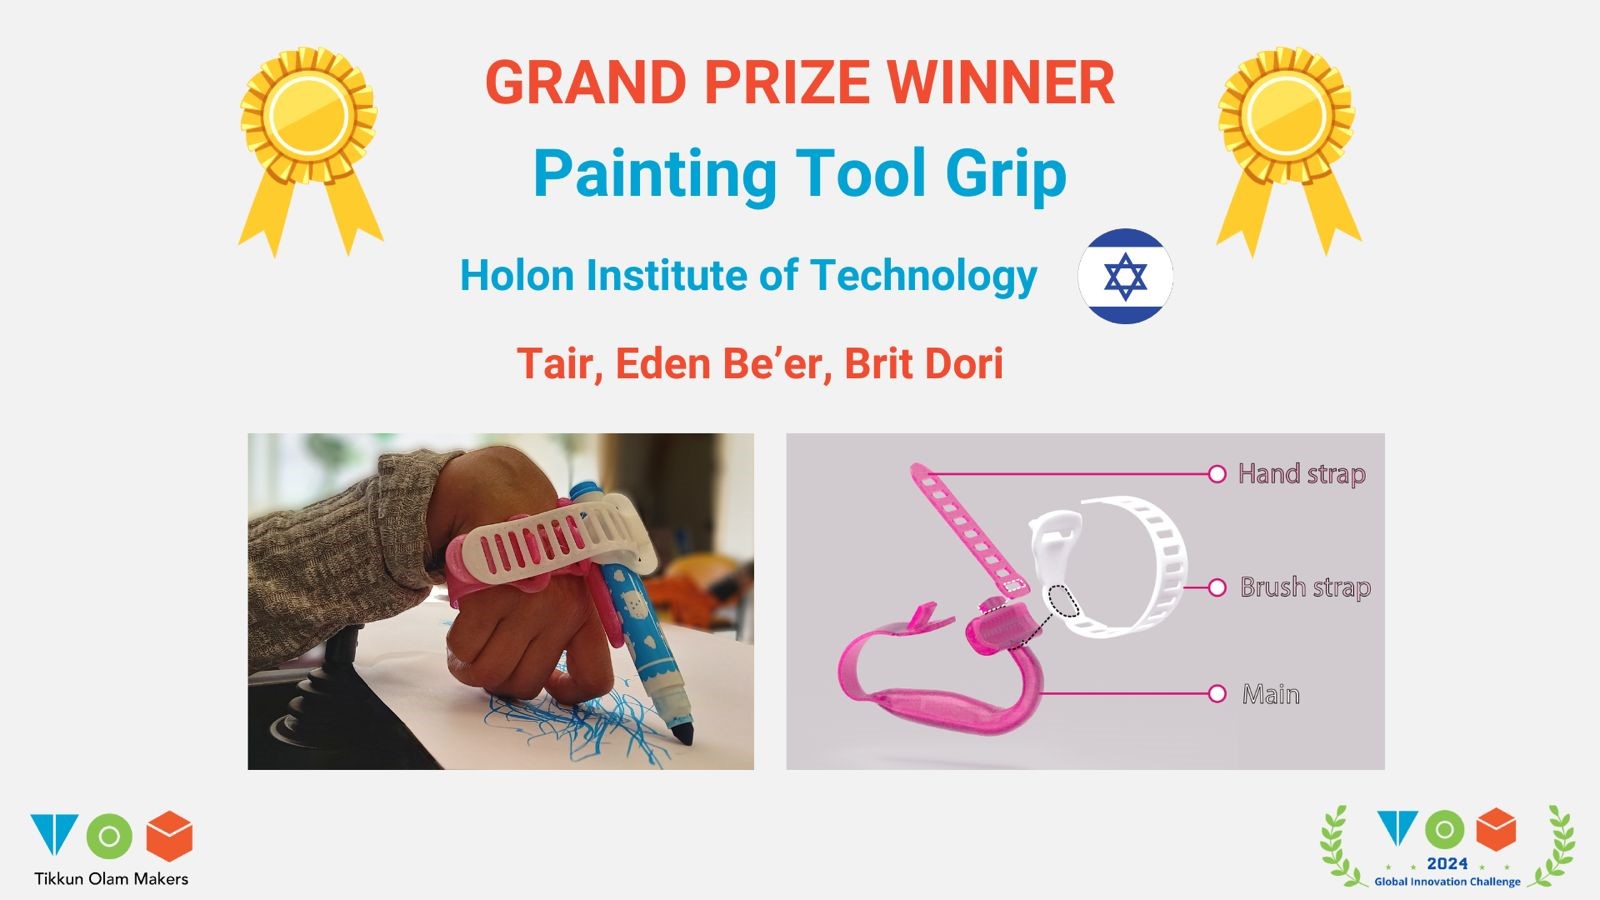 Eden Be’er and Brit Dori won the Grand Prize for their ''Painting Tool Grip'' project